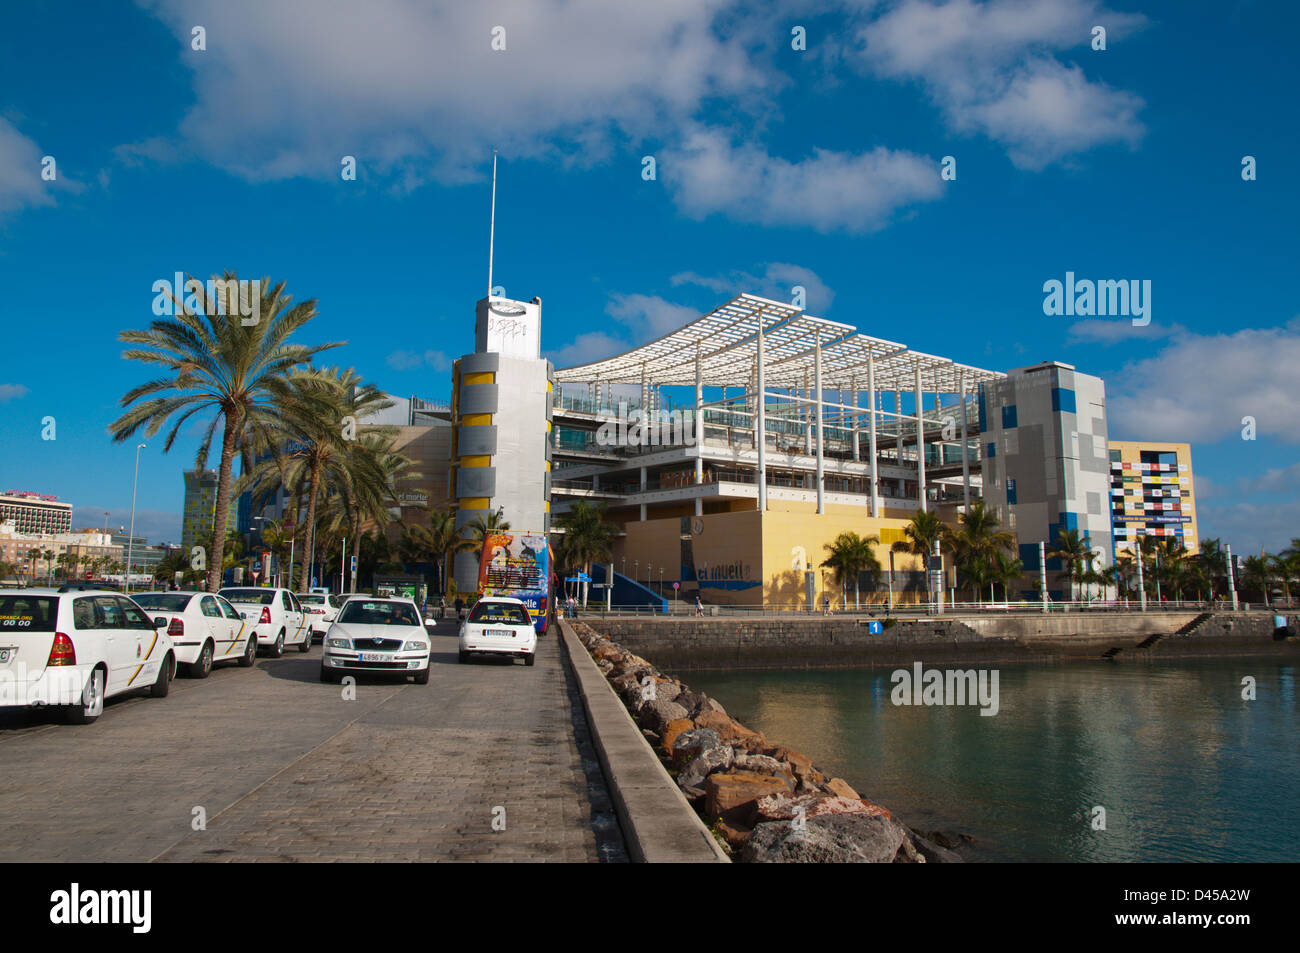 Taxis outside El Muelle shopping centre by the port Las Palmas de Gran  Canaria city Gran Canaria island the Canary Islands Spain Stock Photo -  Alamy